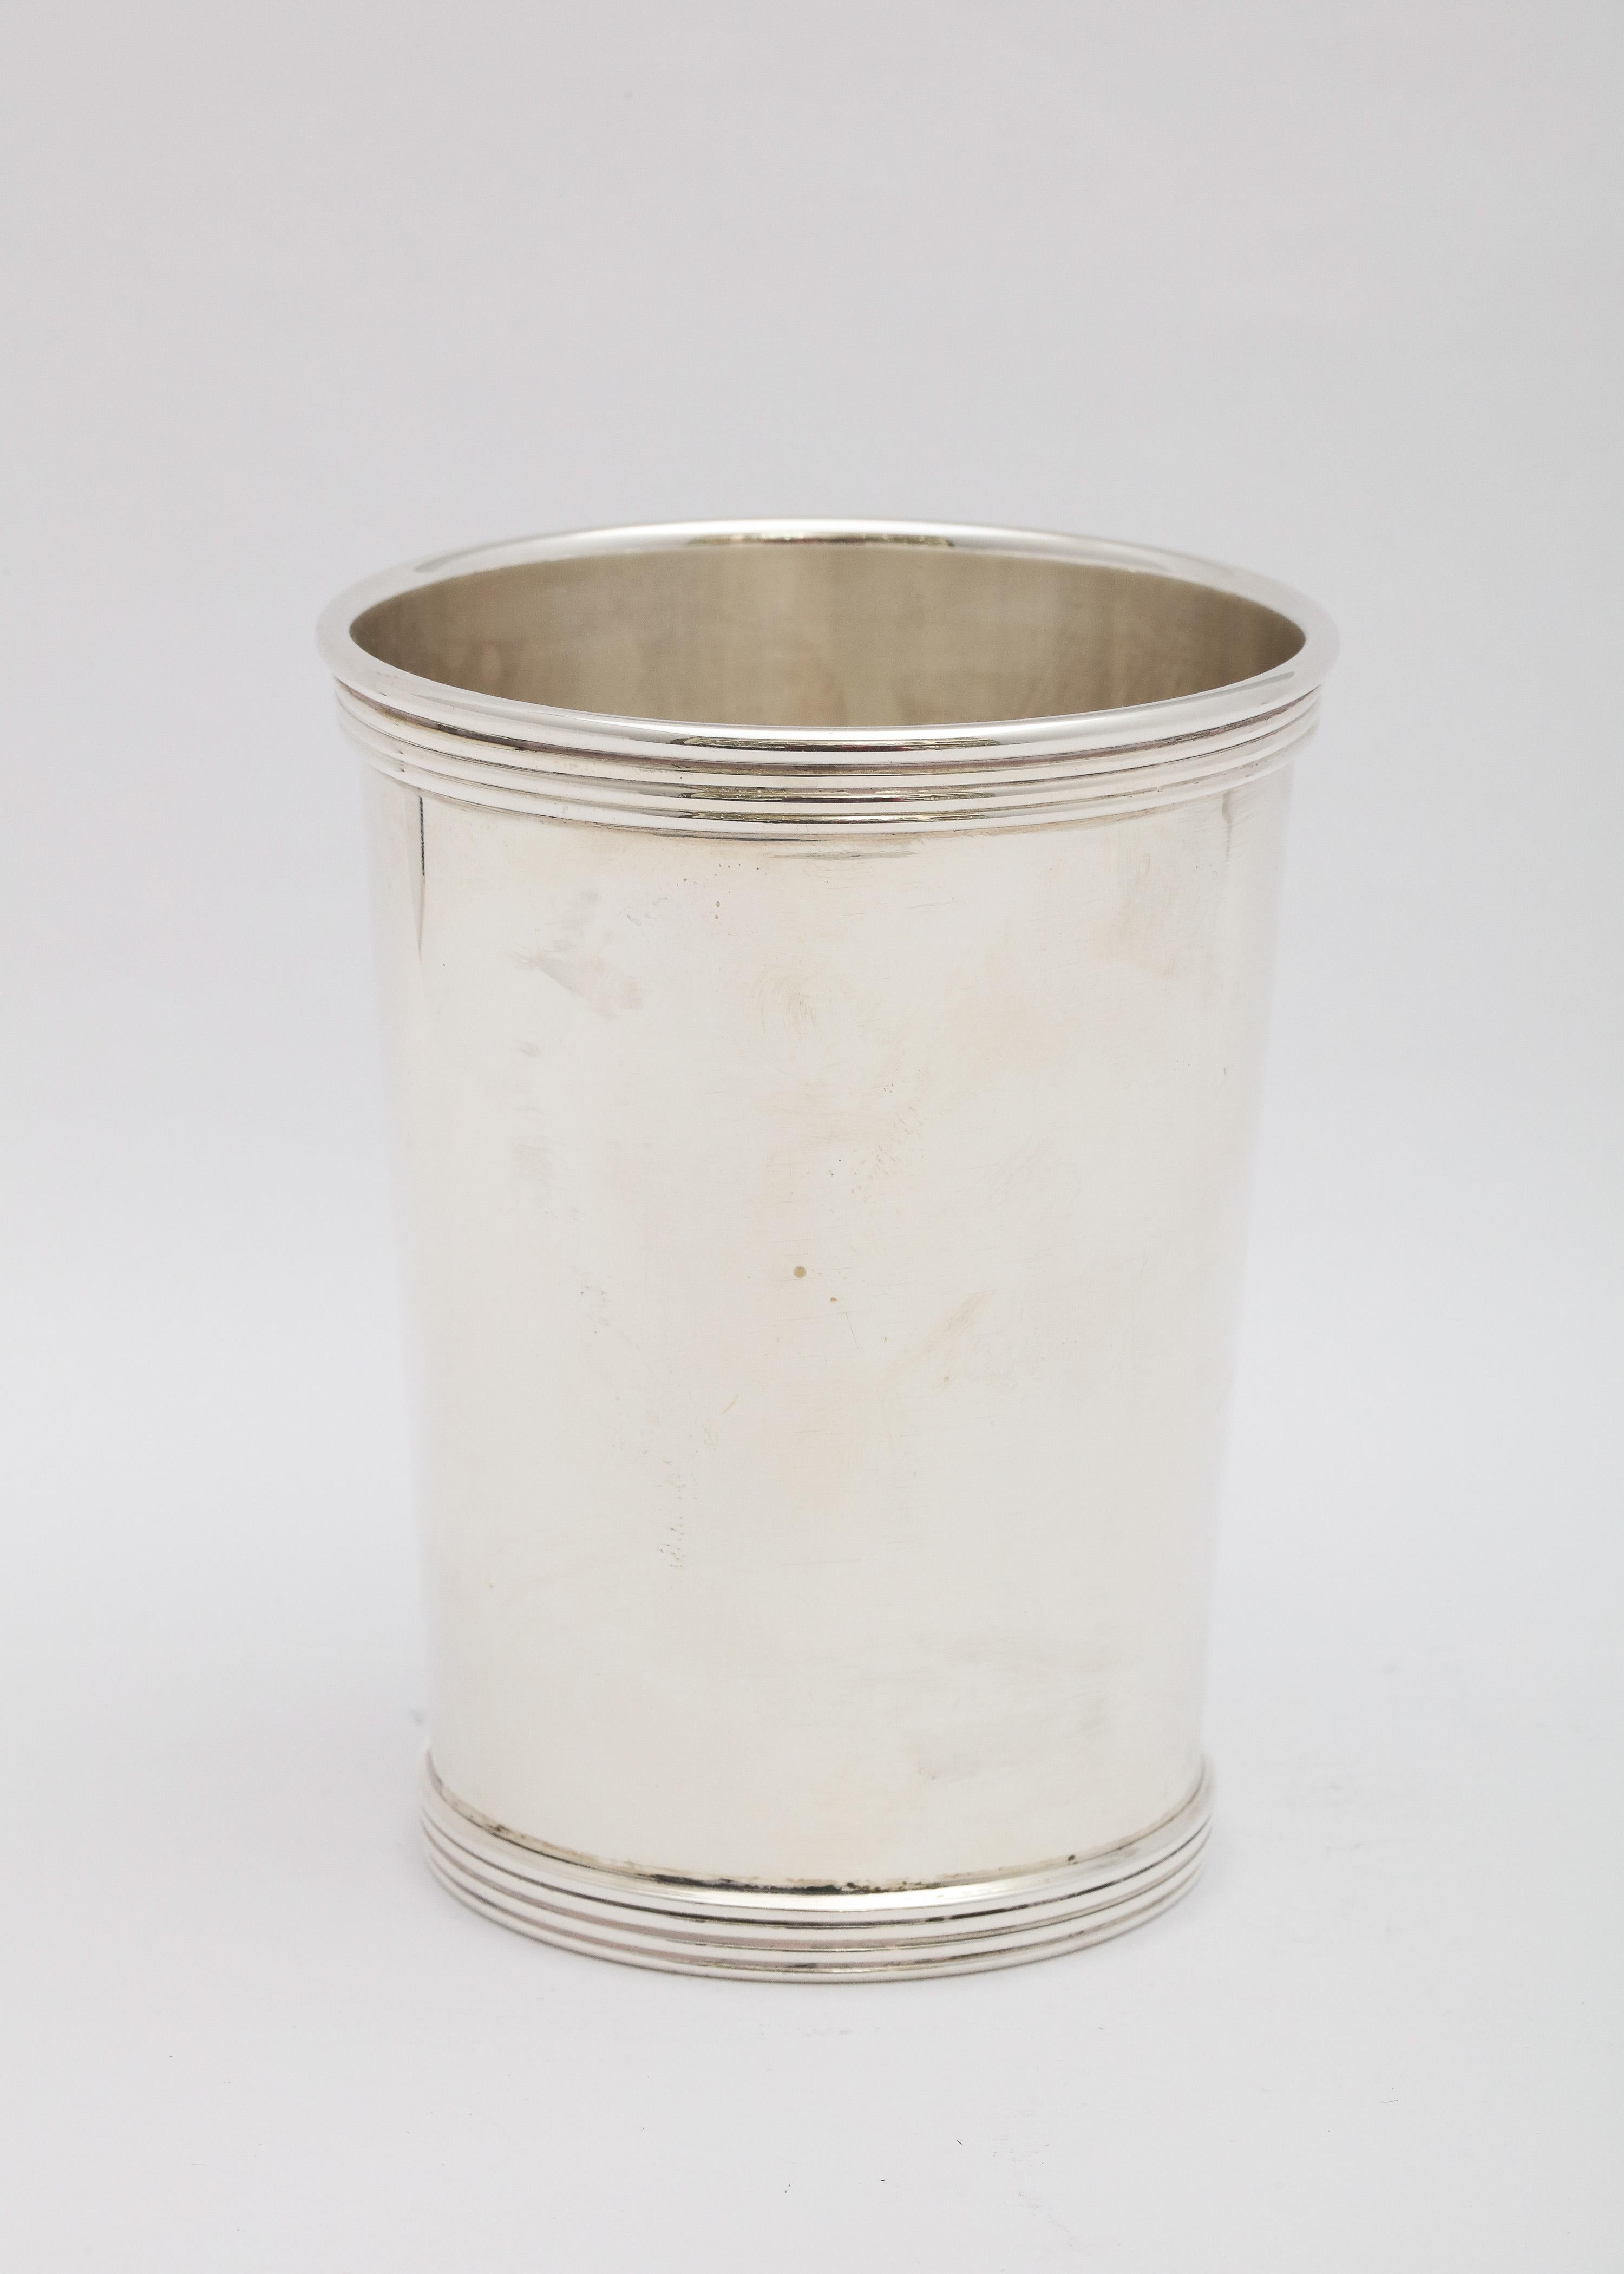 American Art Deco Period Sterling Silver Mint Julep Cup For Sale